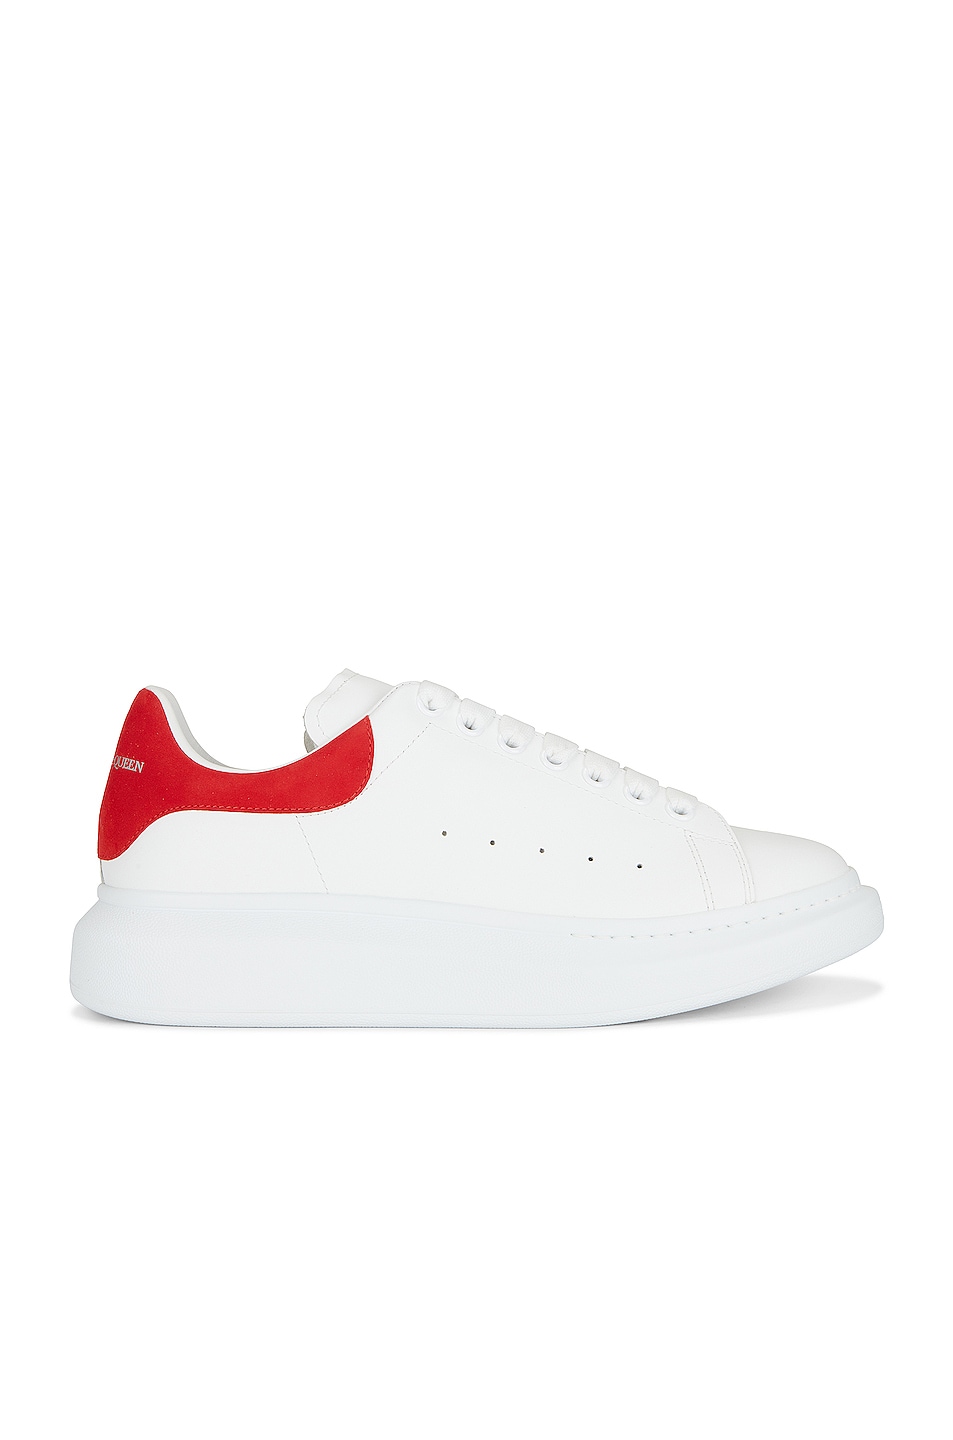 Image 1 of Alexander McQueen Leather Sneaker in White & Lust Red